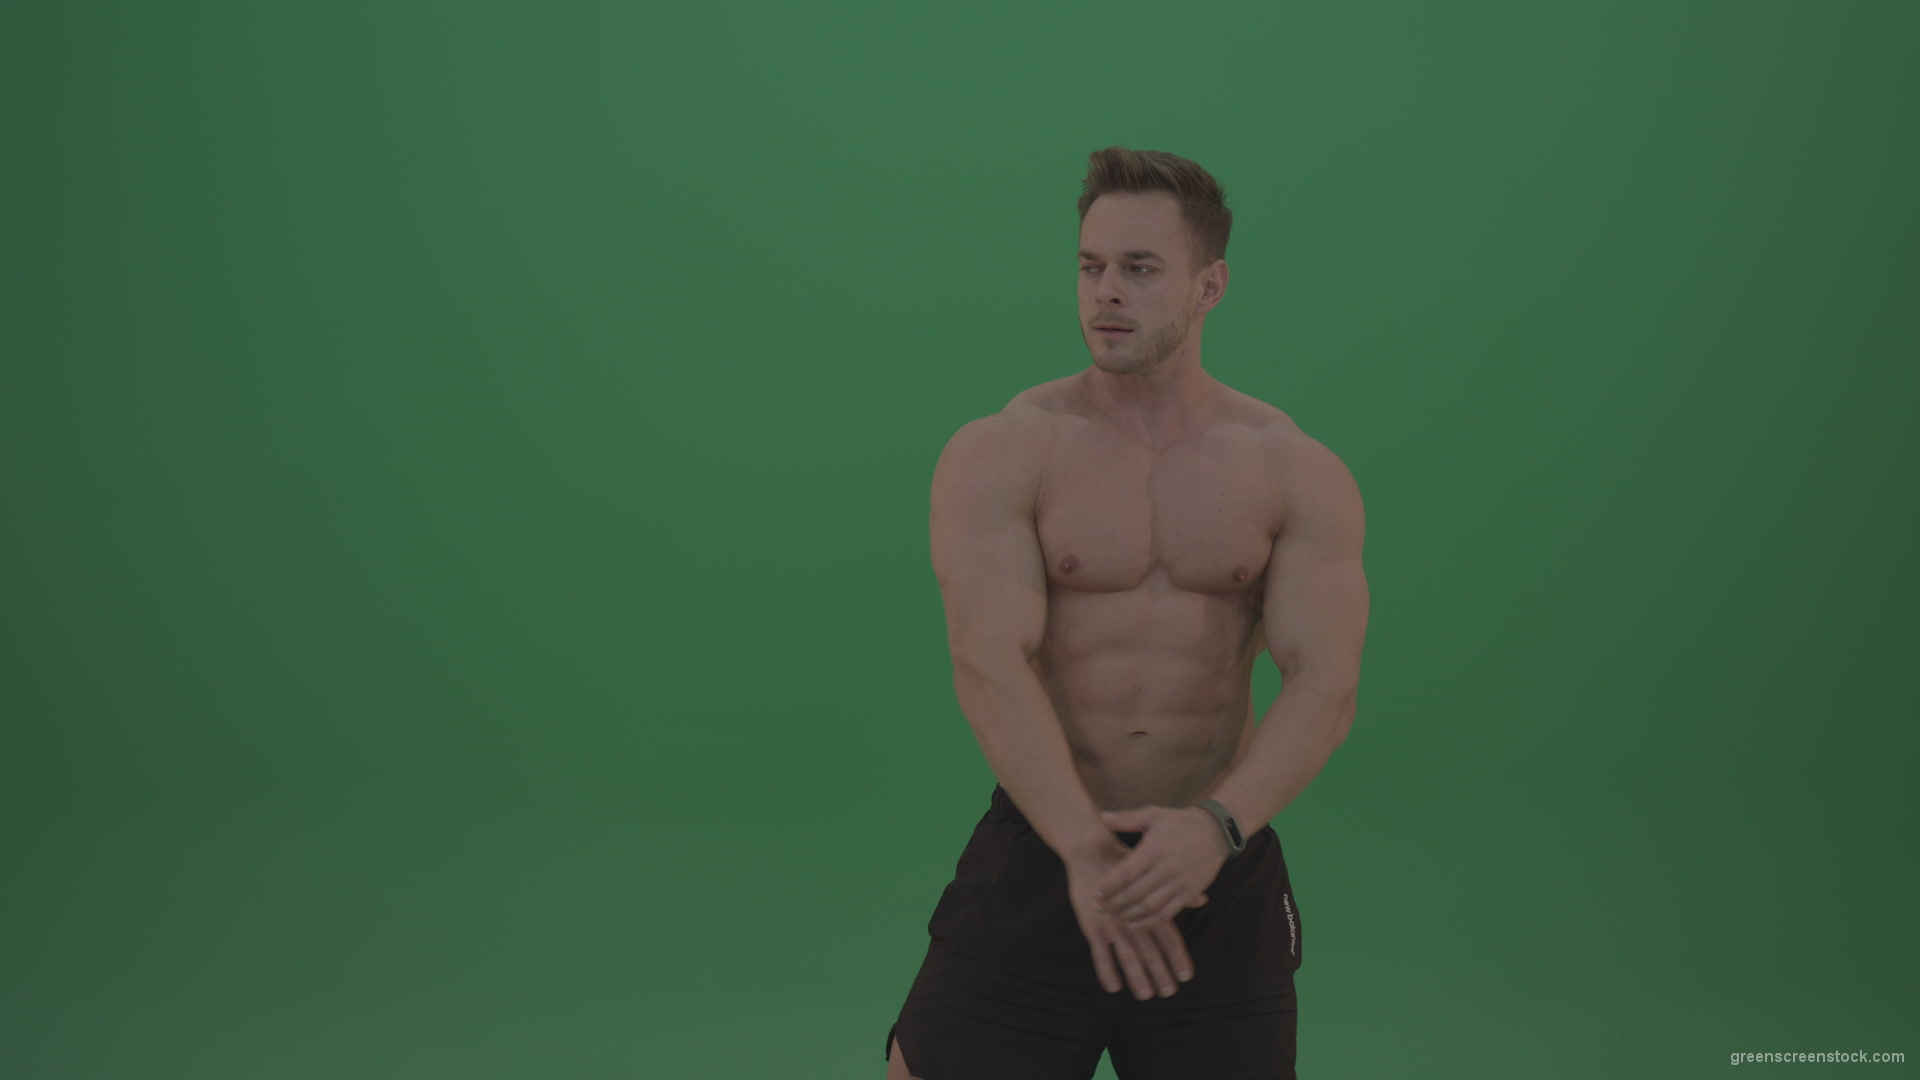 Green-Screen-Blone_Bodybuilder_Demonstrating_Front_Double_Biceps_And_Lateral_Spread_Positions_On_Green_Screen_Wall_Background_002 Green Screen Stock